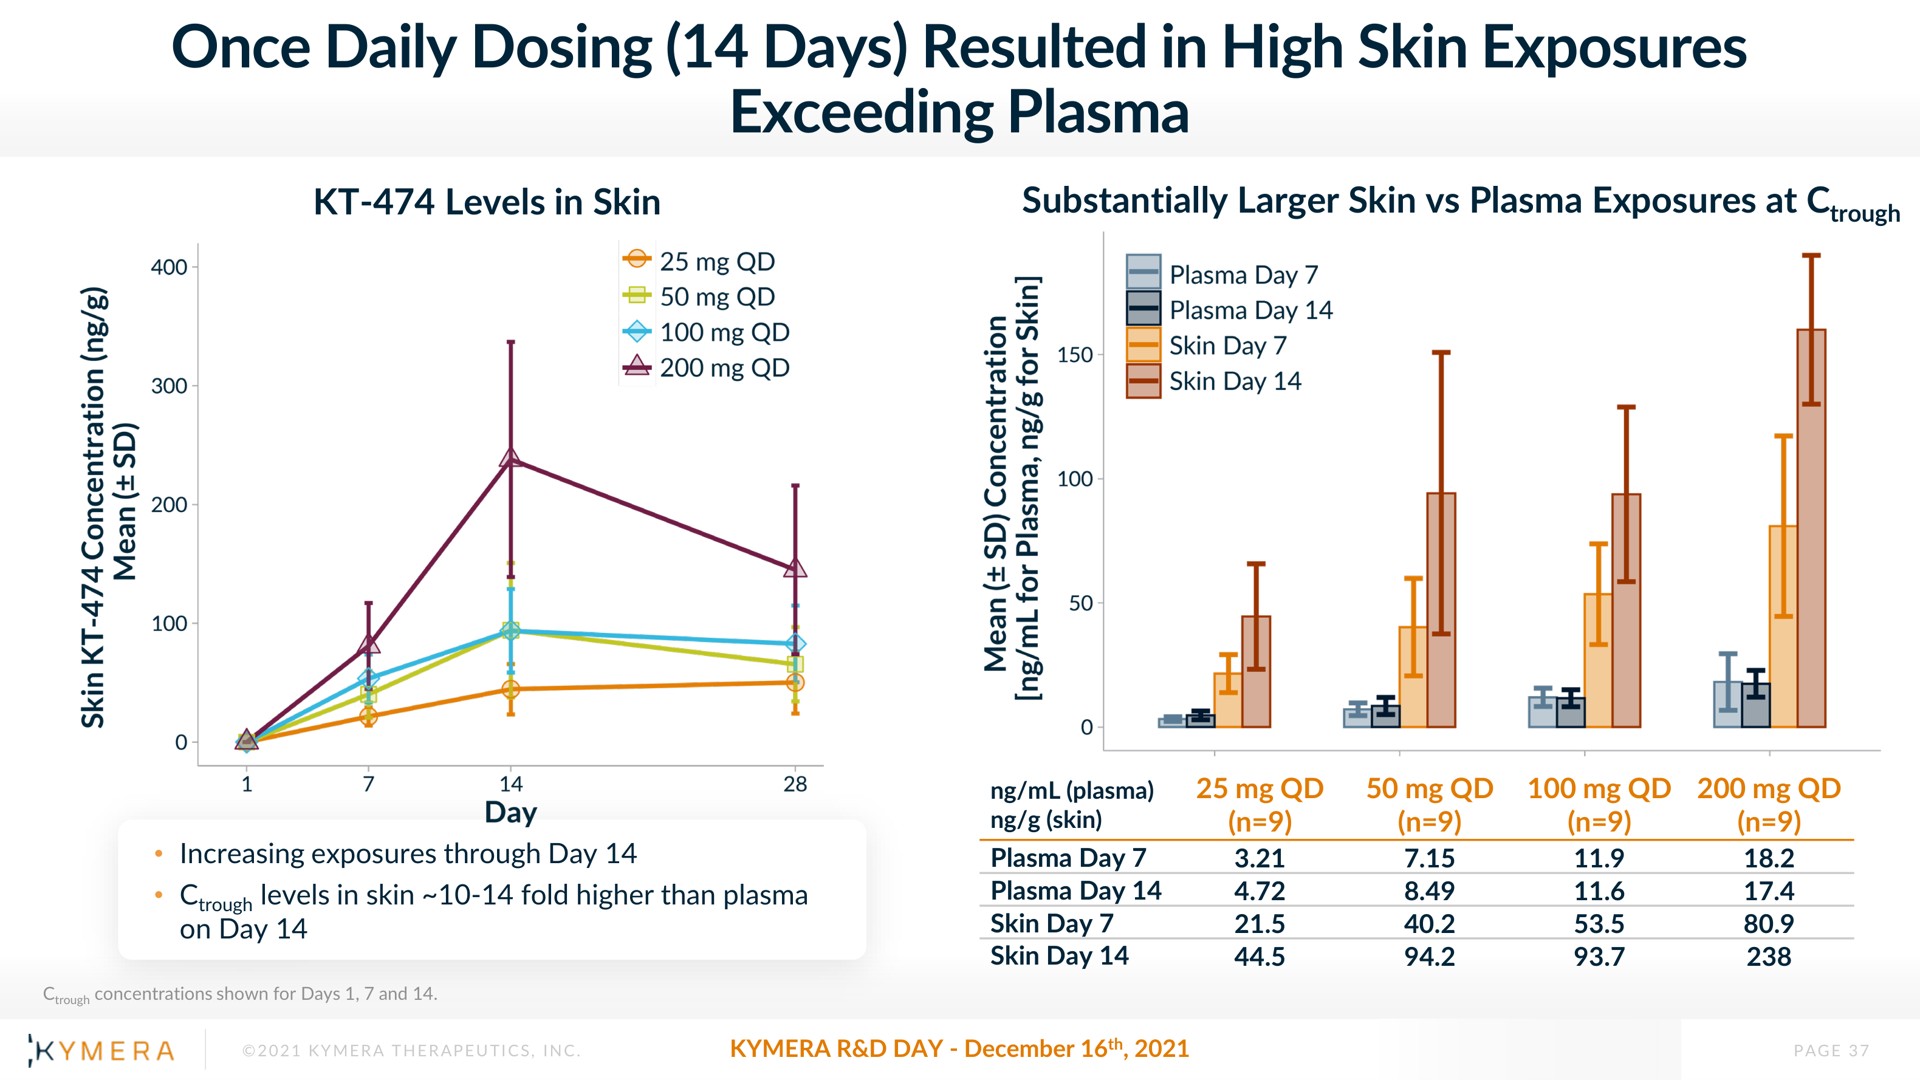 once daily dosing days resulted in high skin exposures exceeding plasma | Kymera